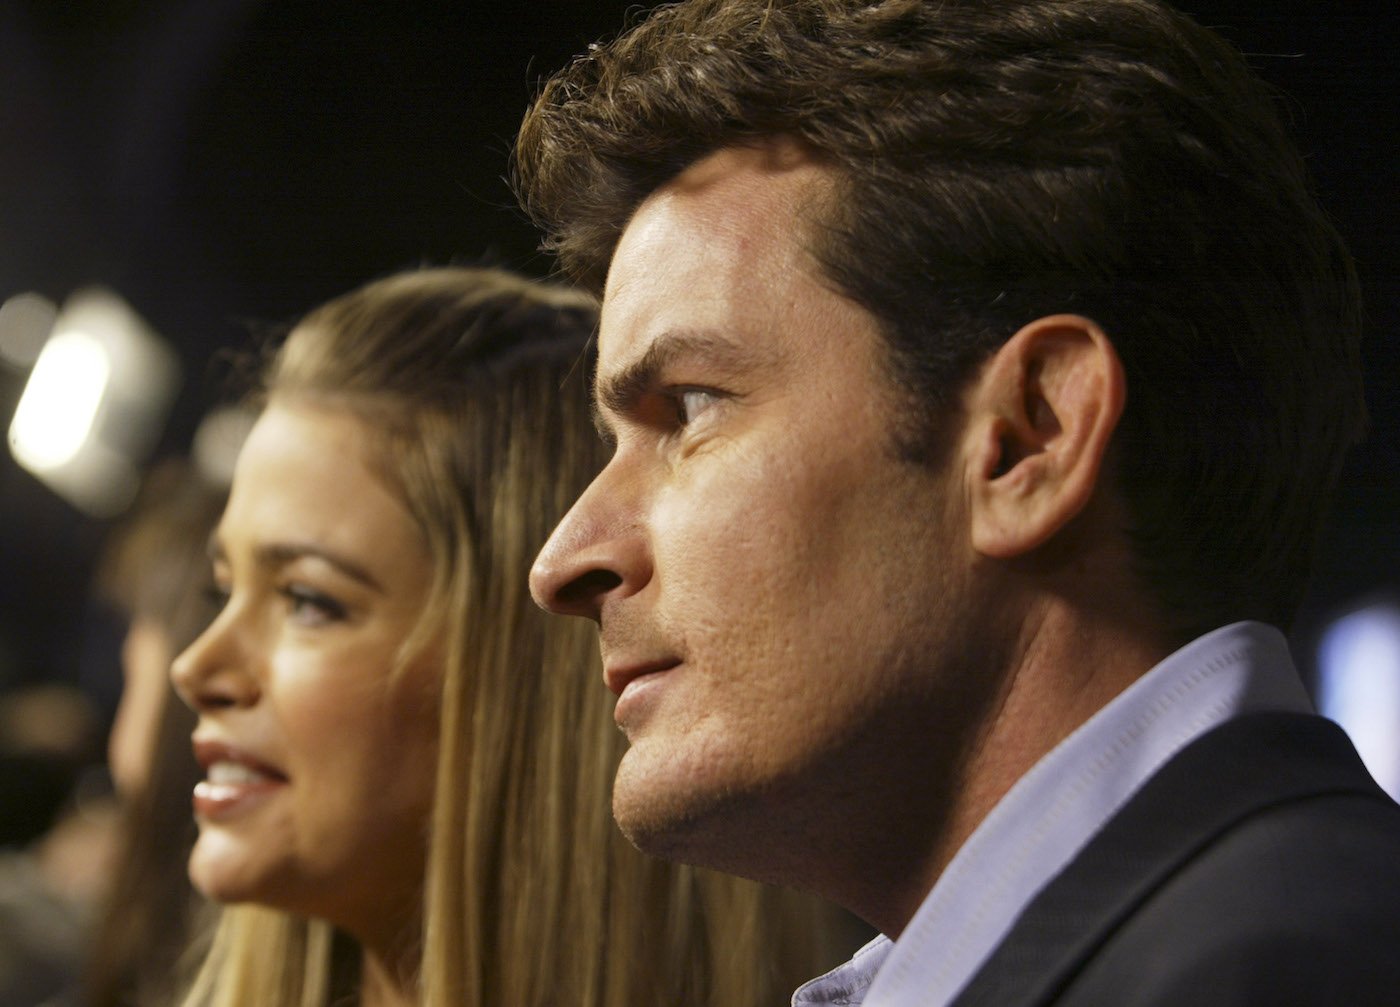 Charlie Sheen and Denise Richards at the LA premiere of 'The Big Bounce' in Westwood, California, in January 2004